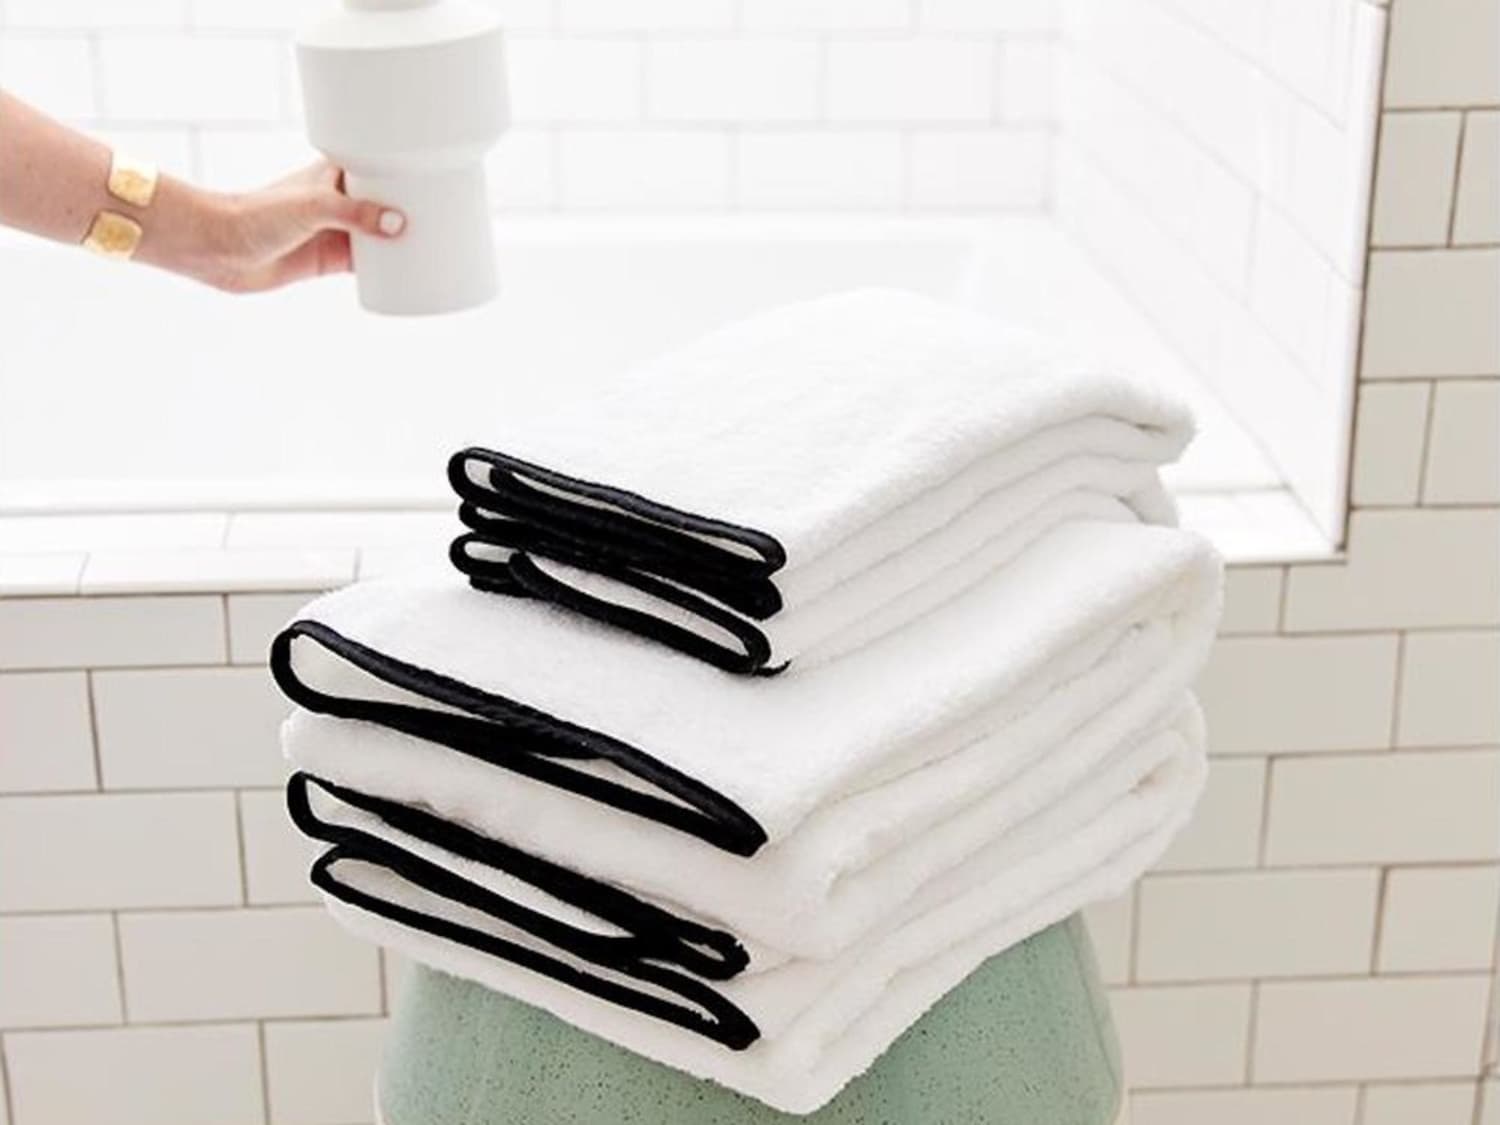 21 Luxurious Bath Towels That Are as Fluffy as They Are Functional